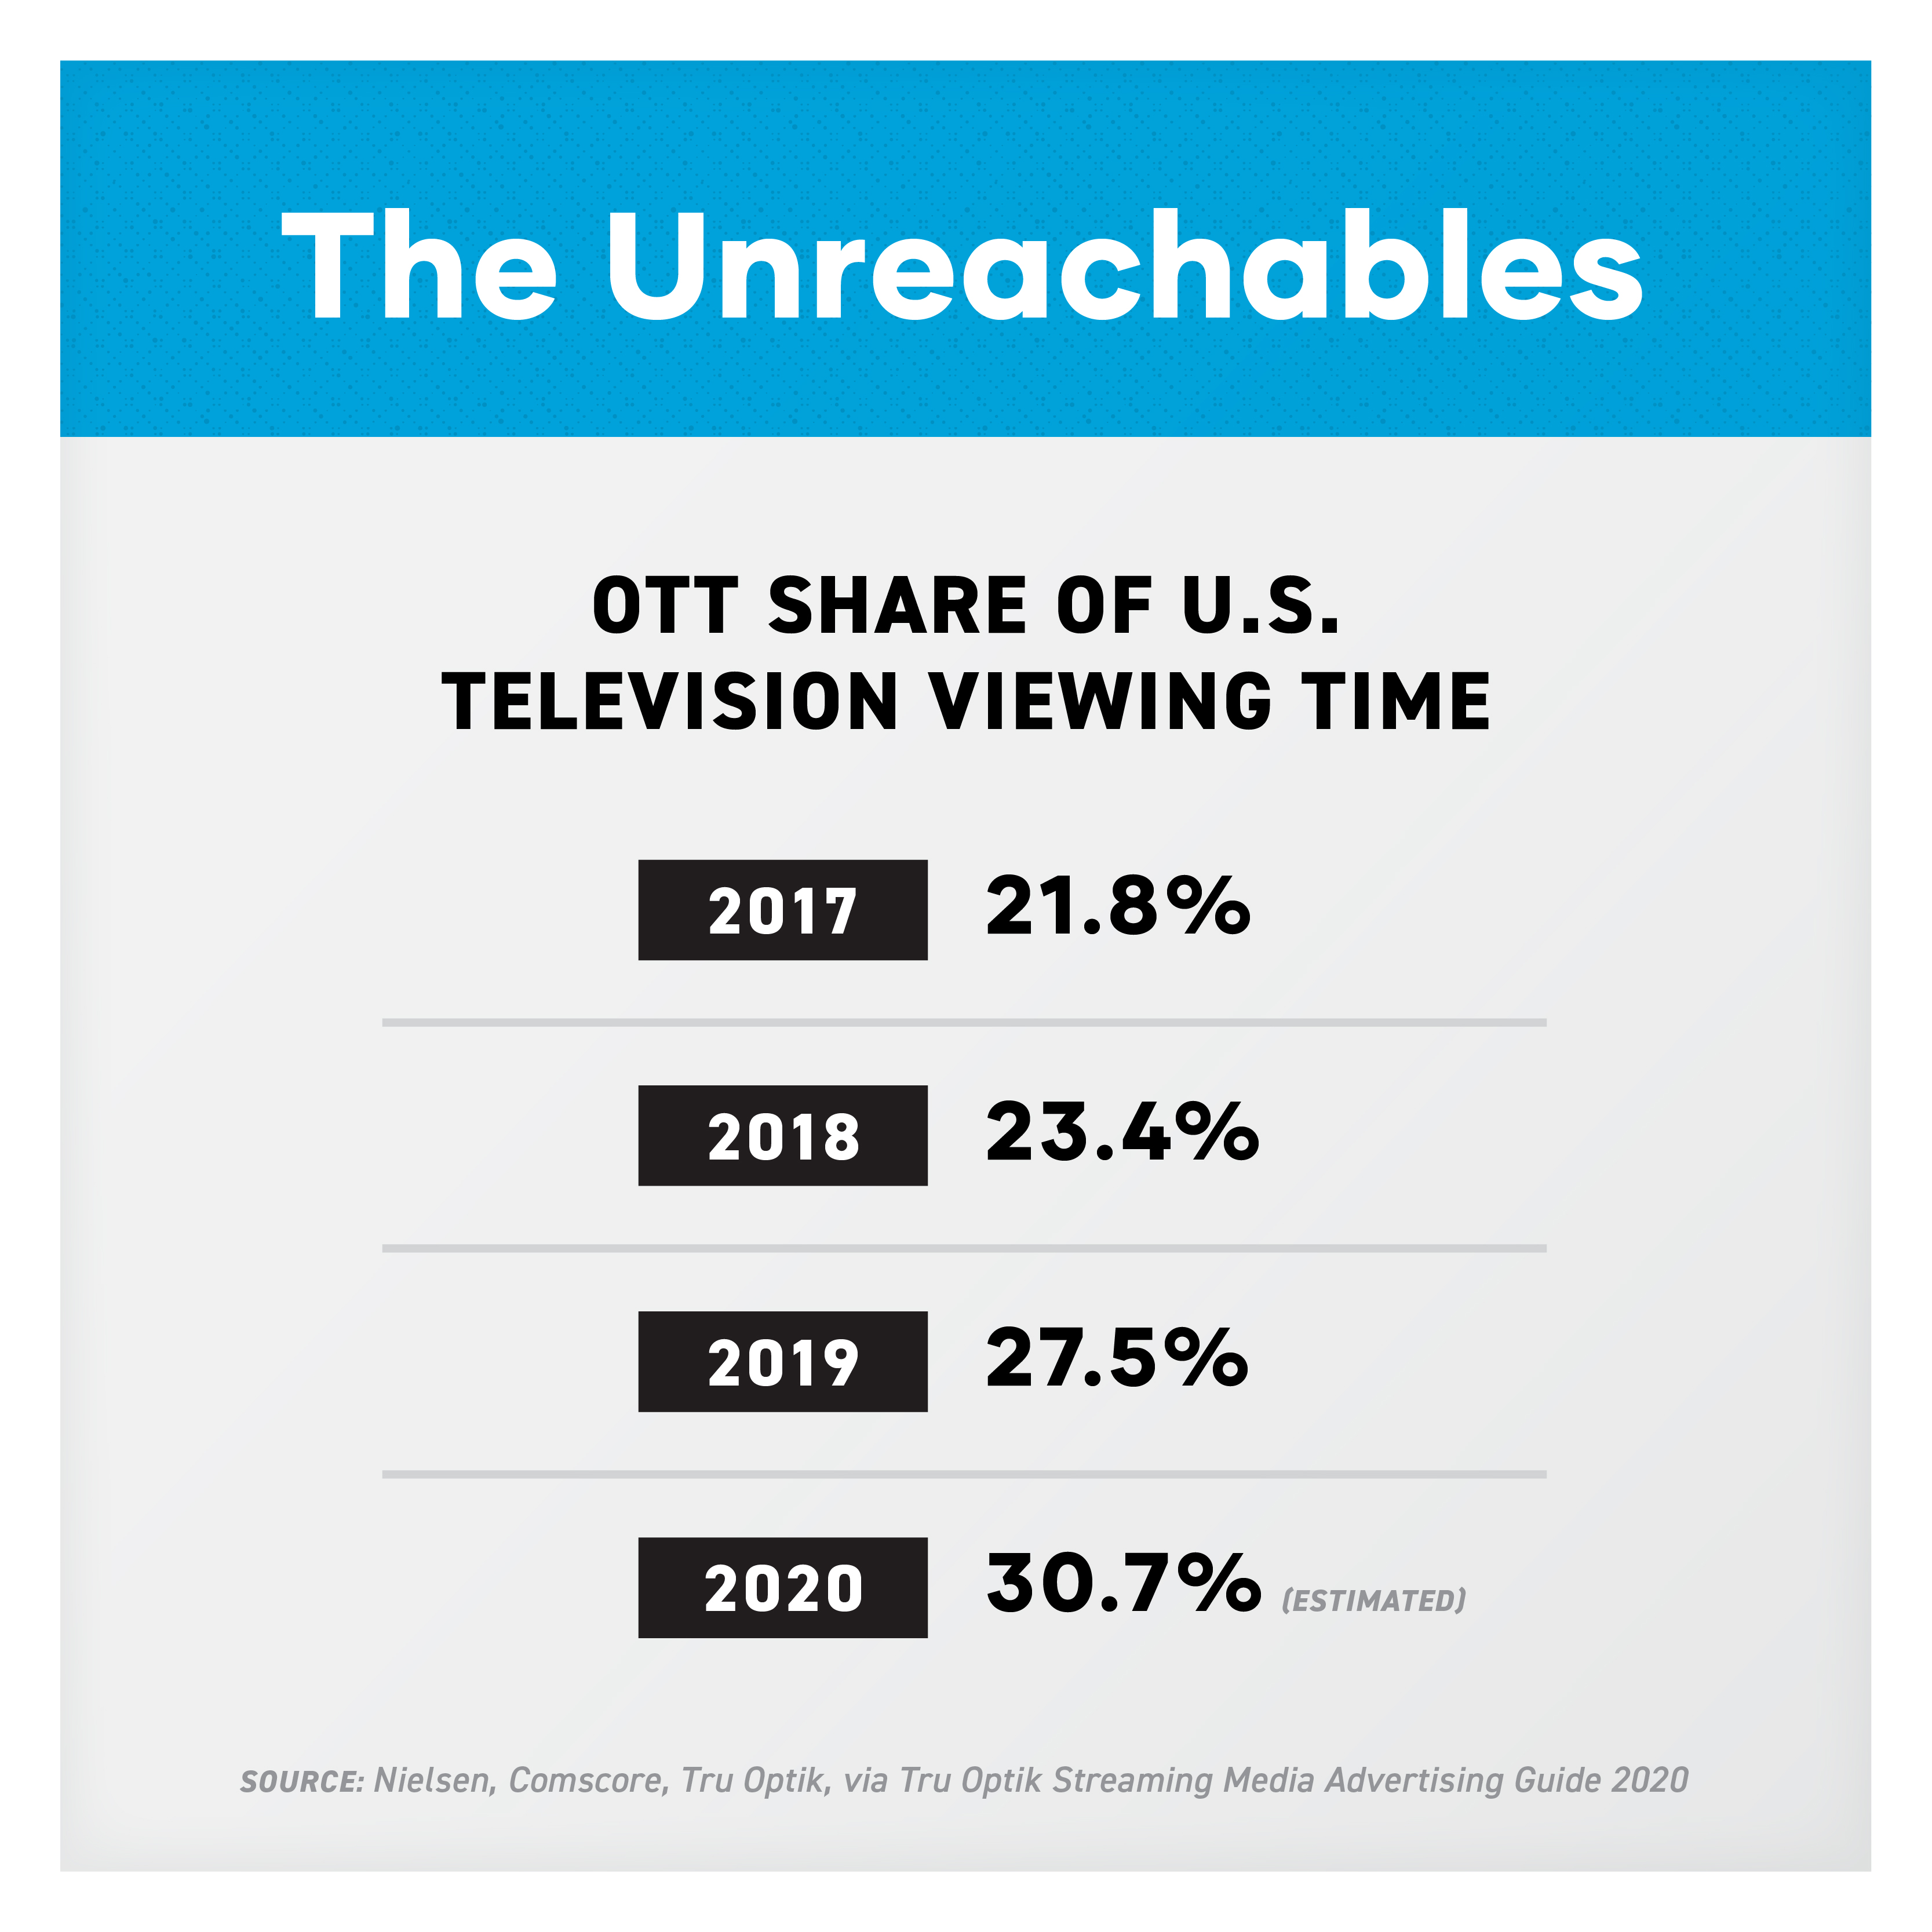 The Unreachable: OTT Share of US TV viewing time